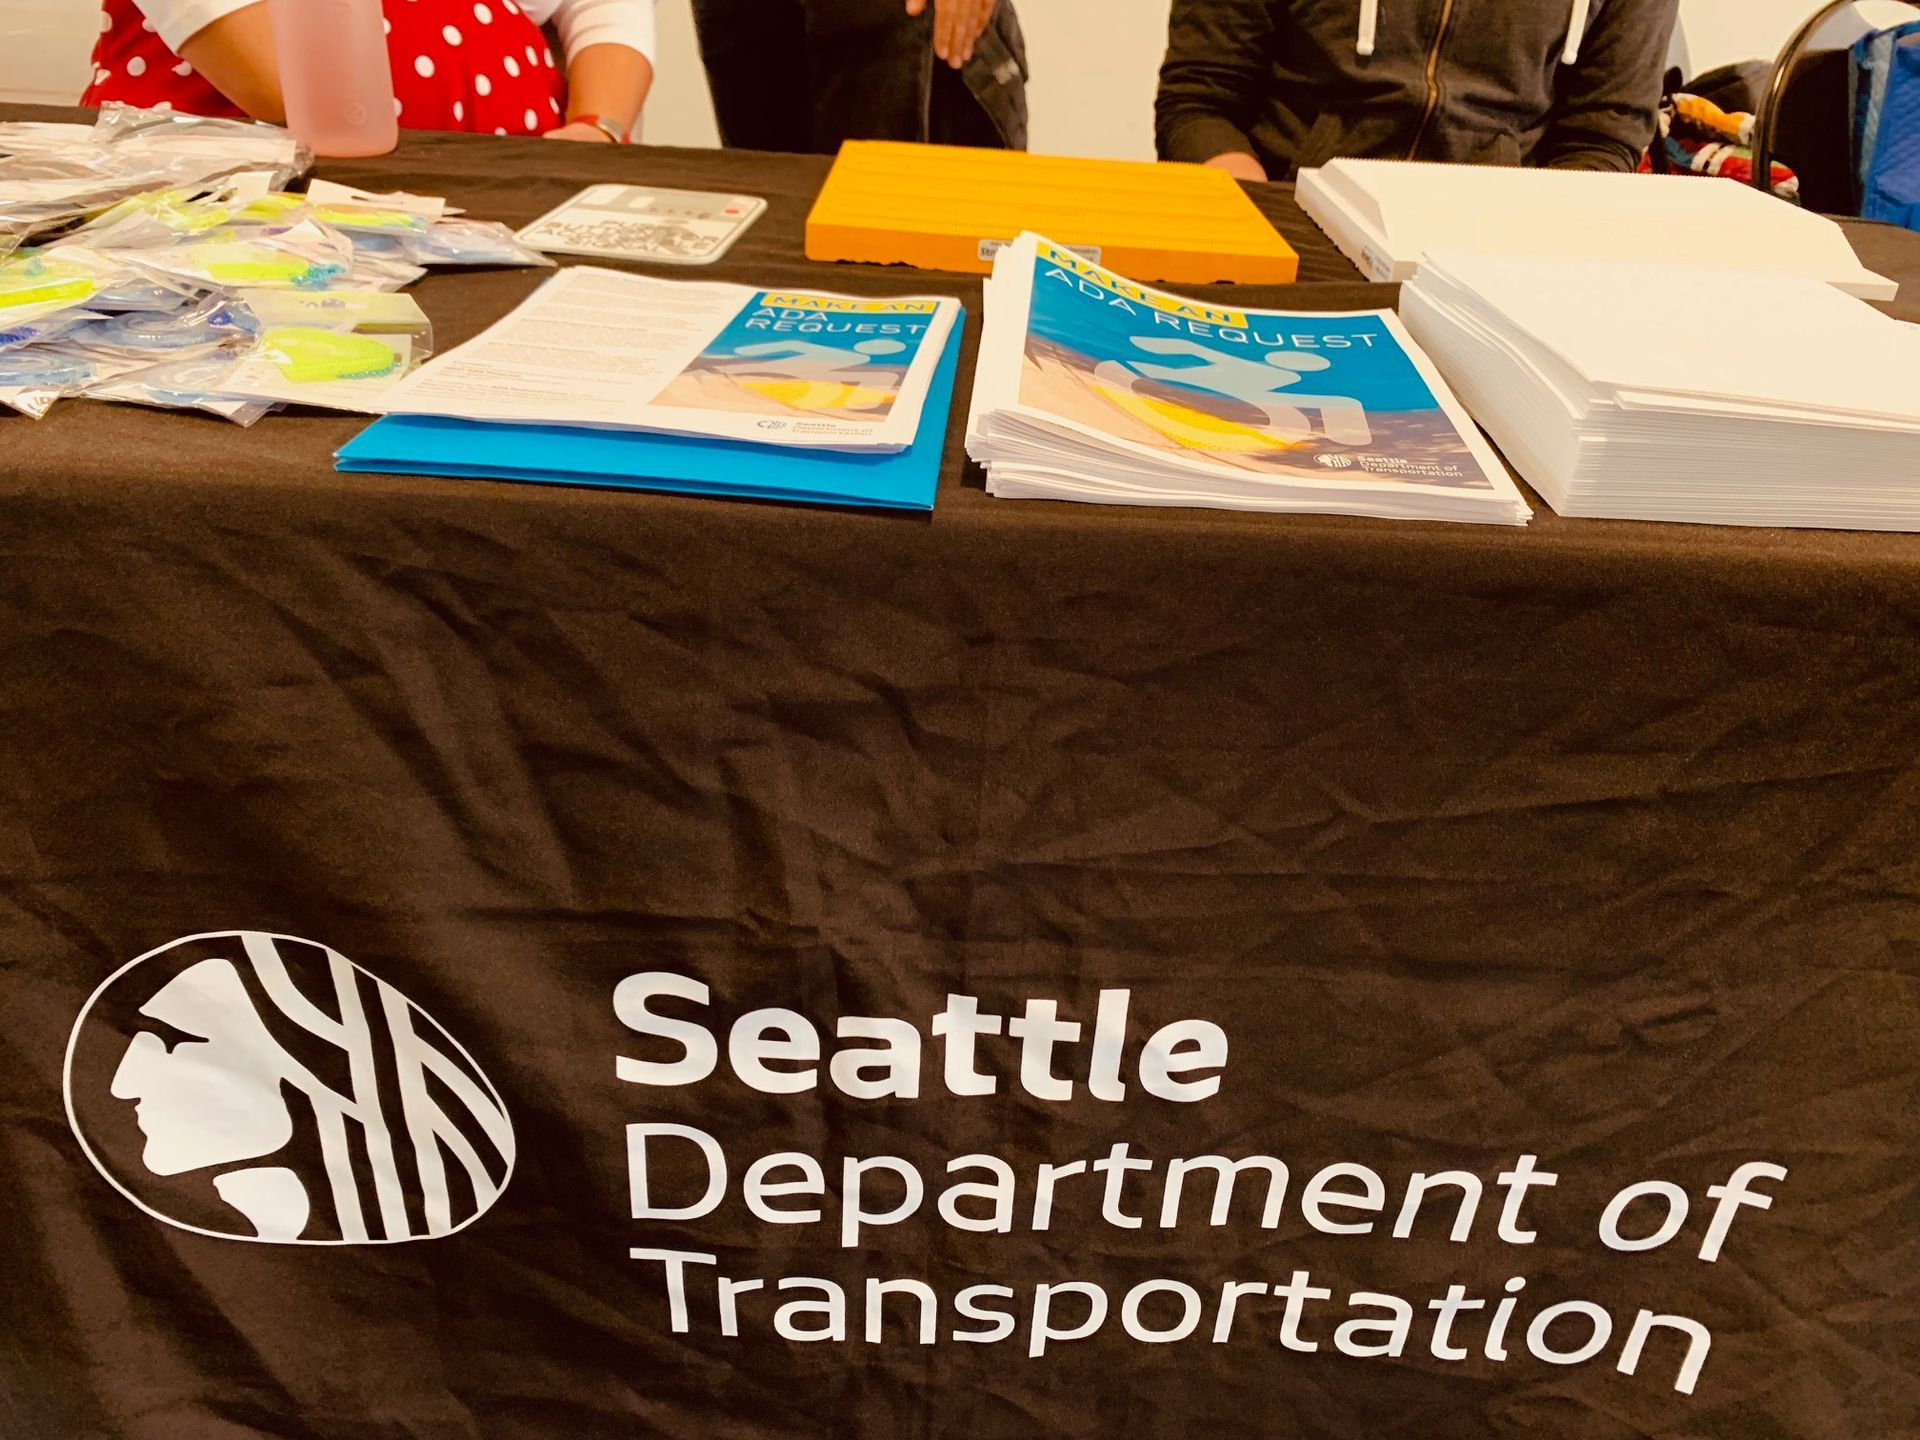  A table from Seattle Department of Transportation focused on how to submit an ADA Request.  